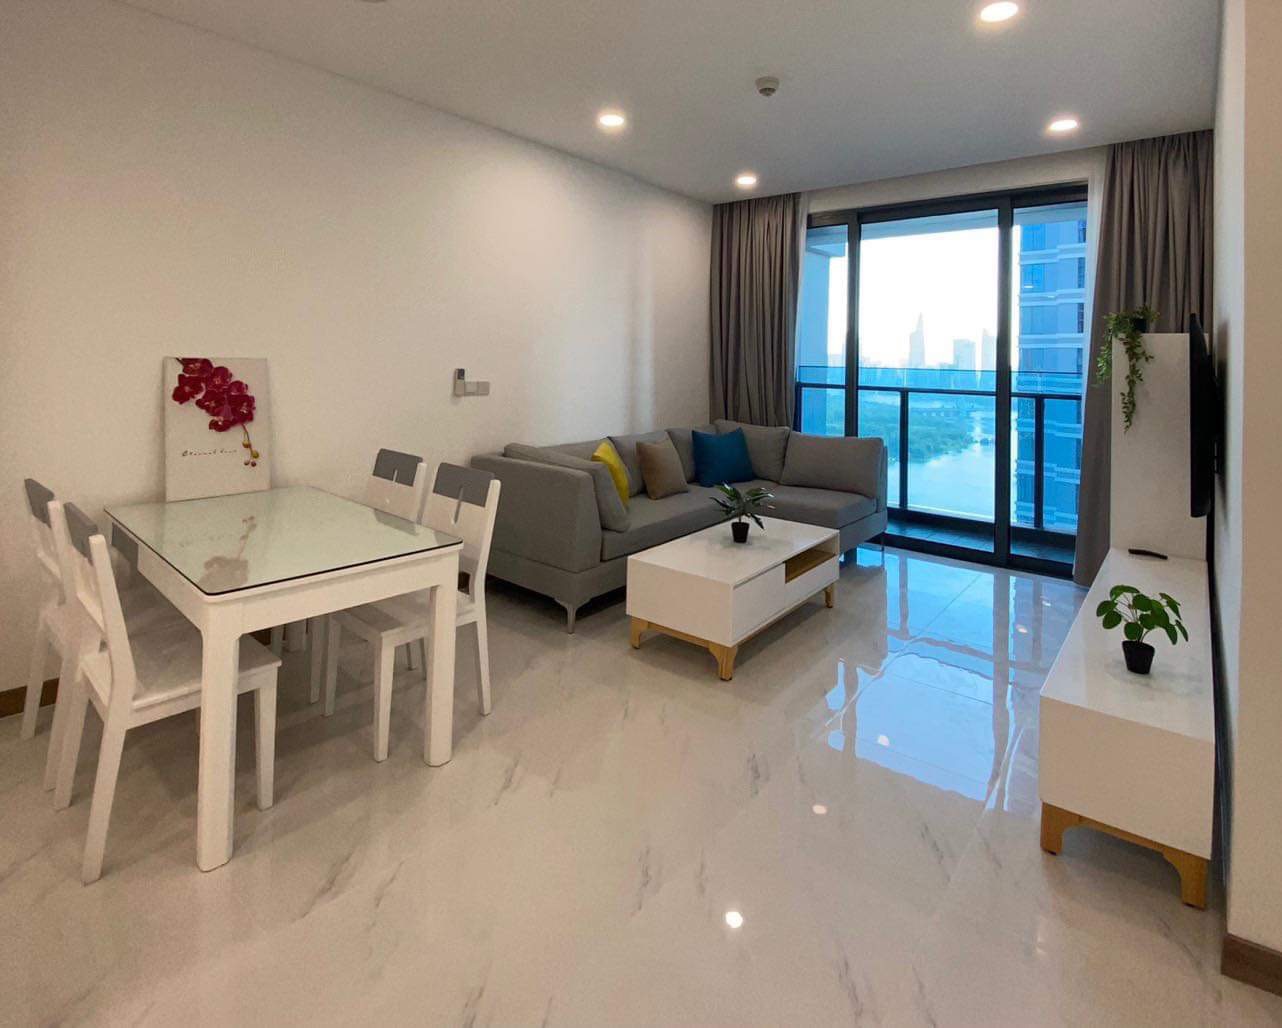 Sunwah Pearl apartment 2 bedroom for rent in Golden House